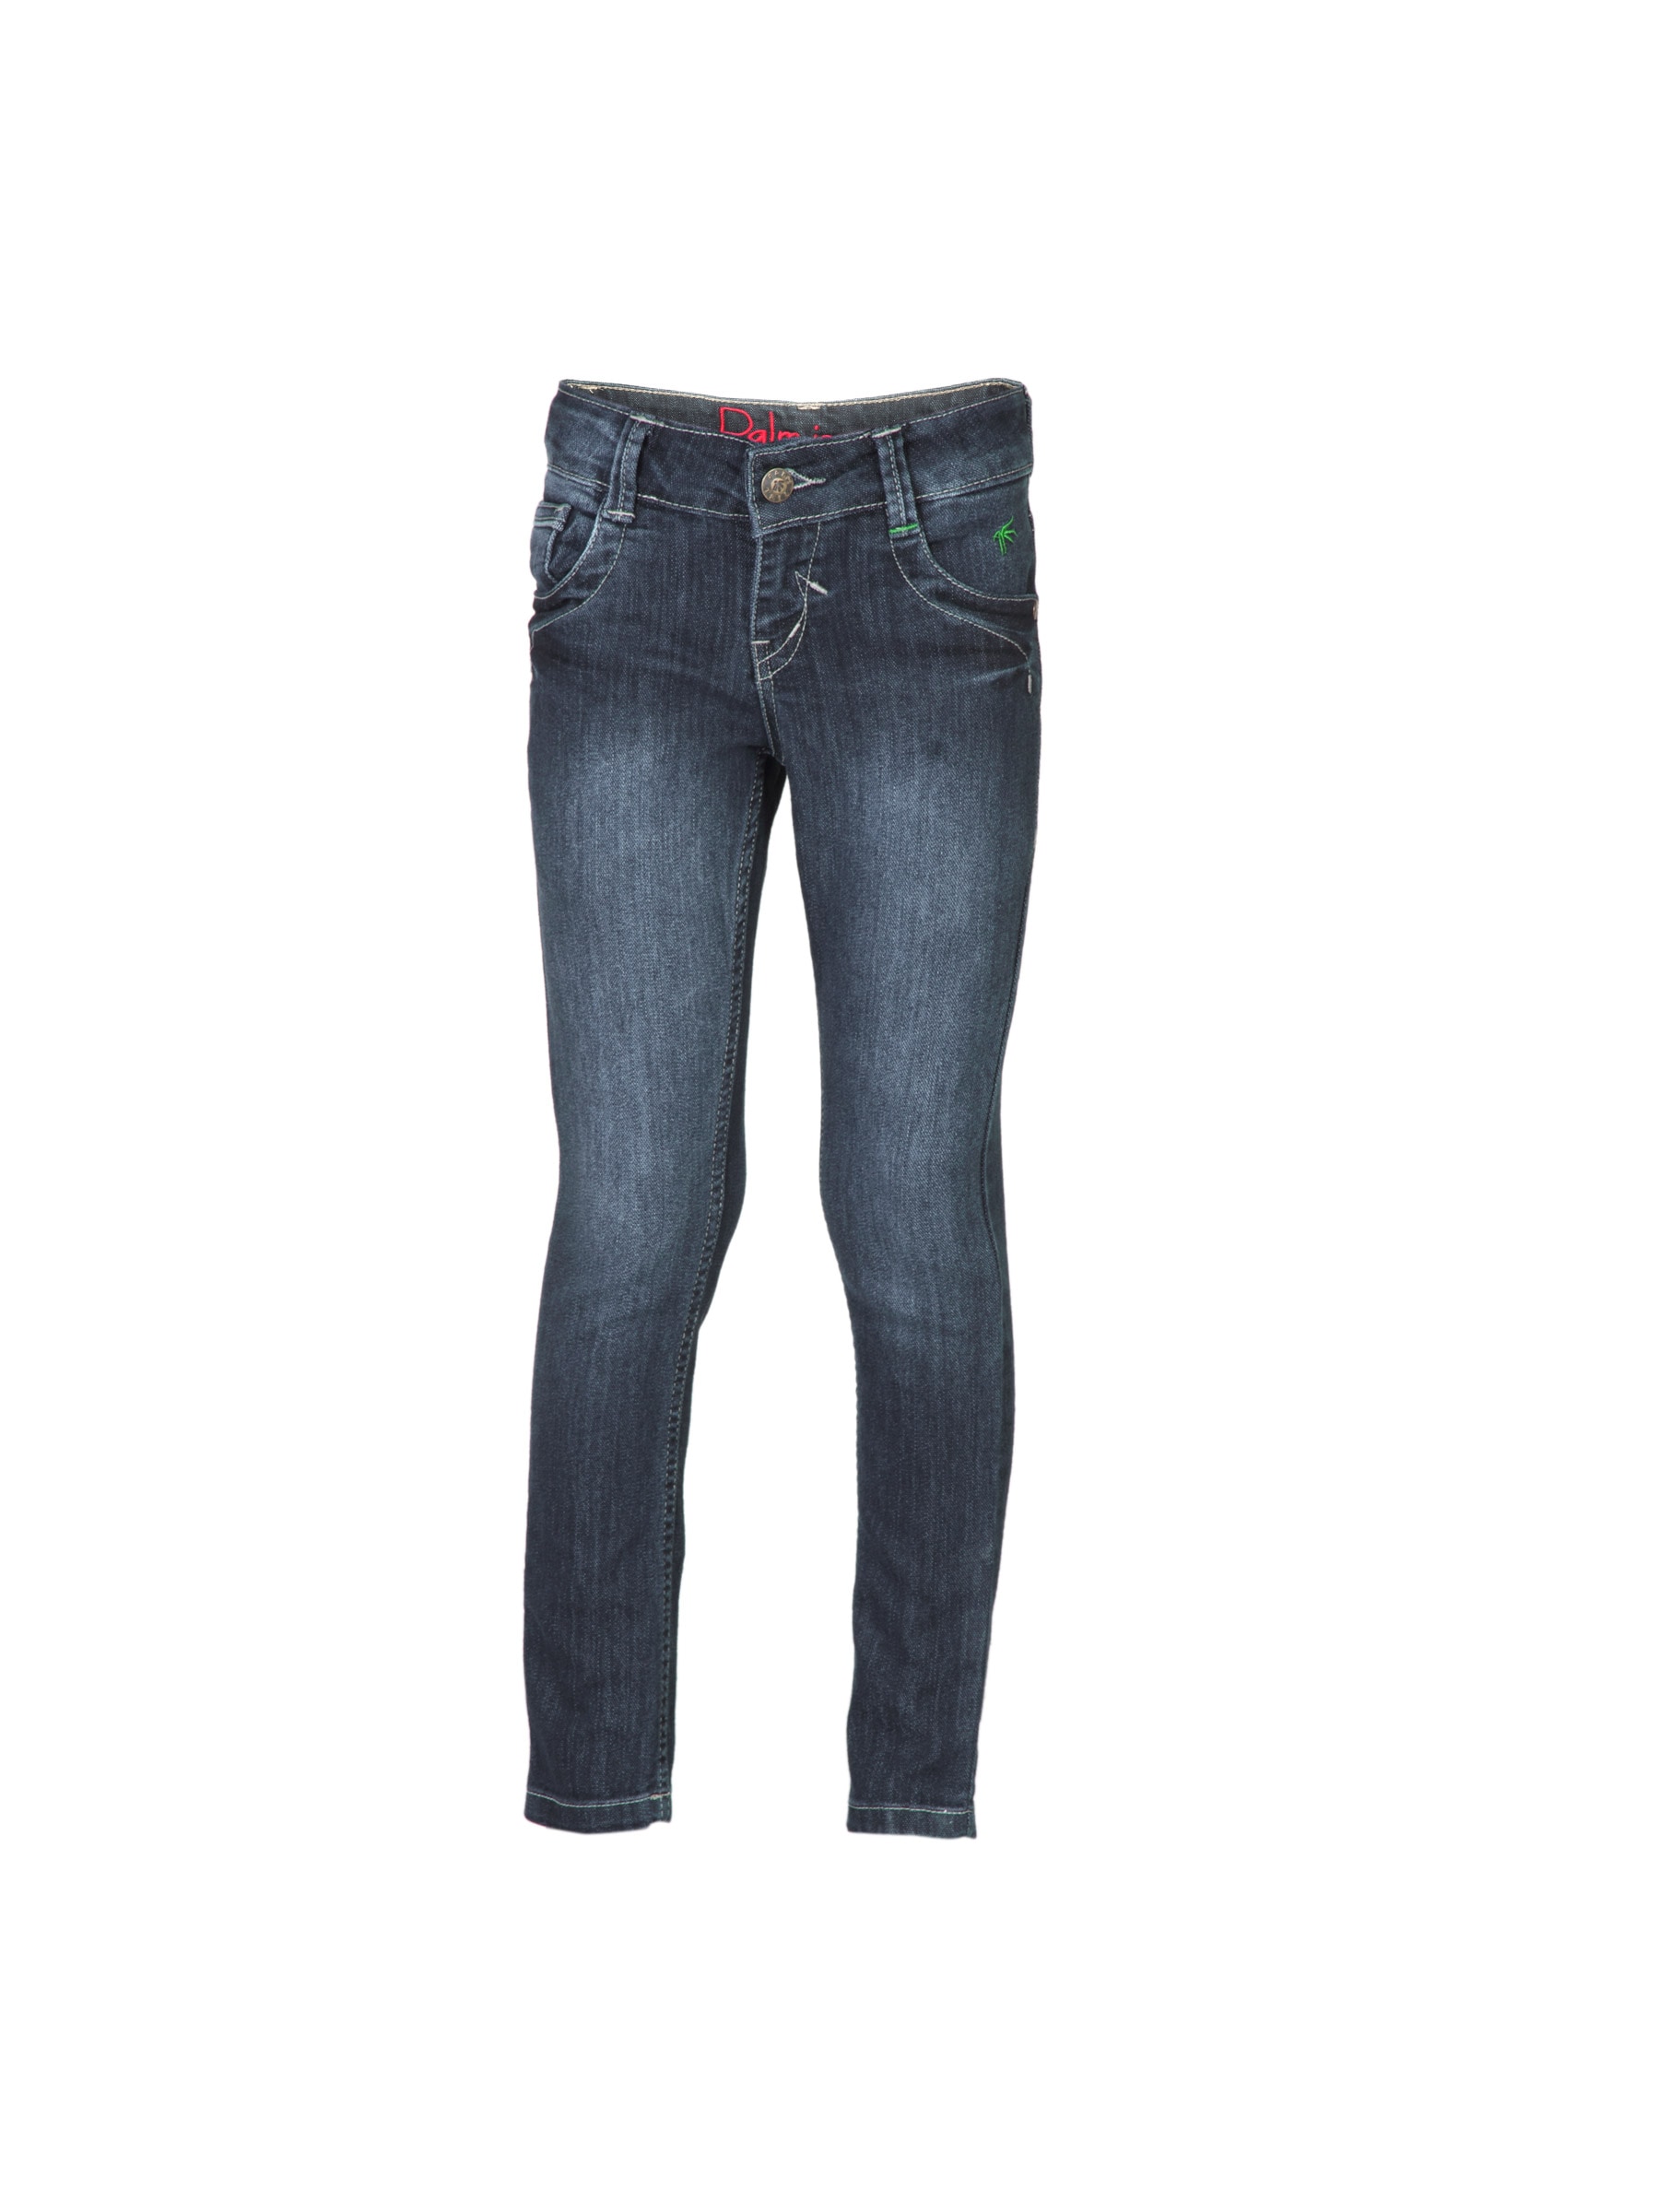 Gini and Jony Girls Woven Navy Blue Jeans